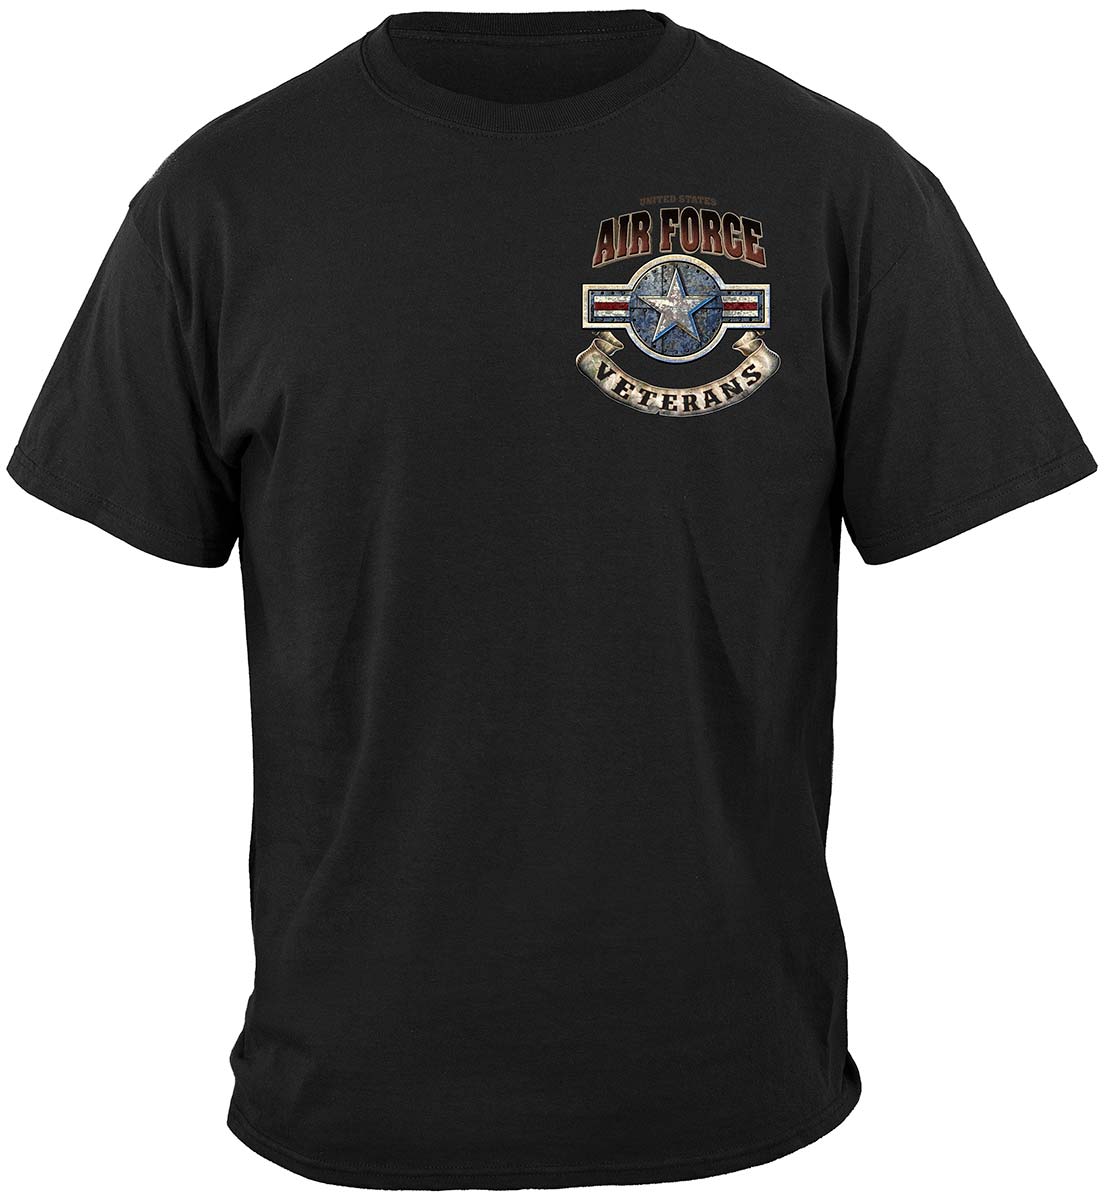 Air Force Proud To Have Served Premium T-Shirt